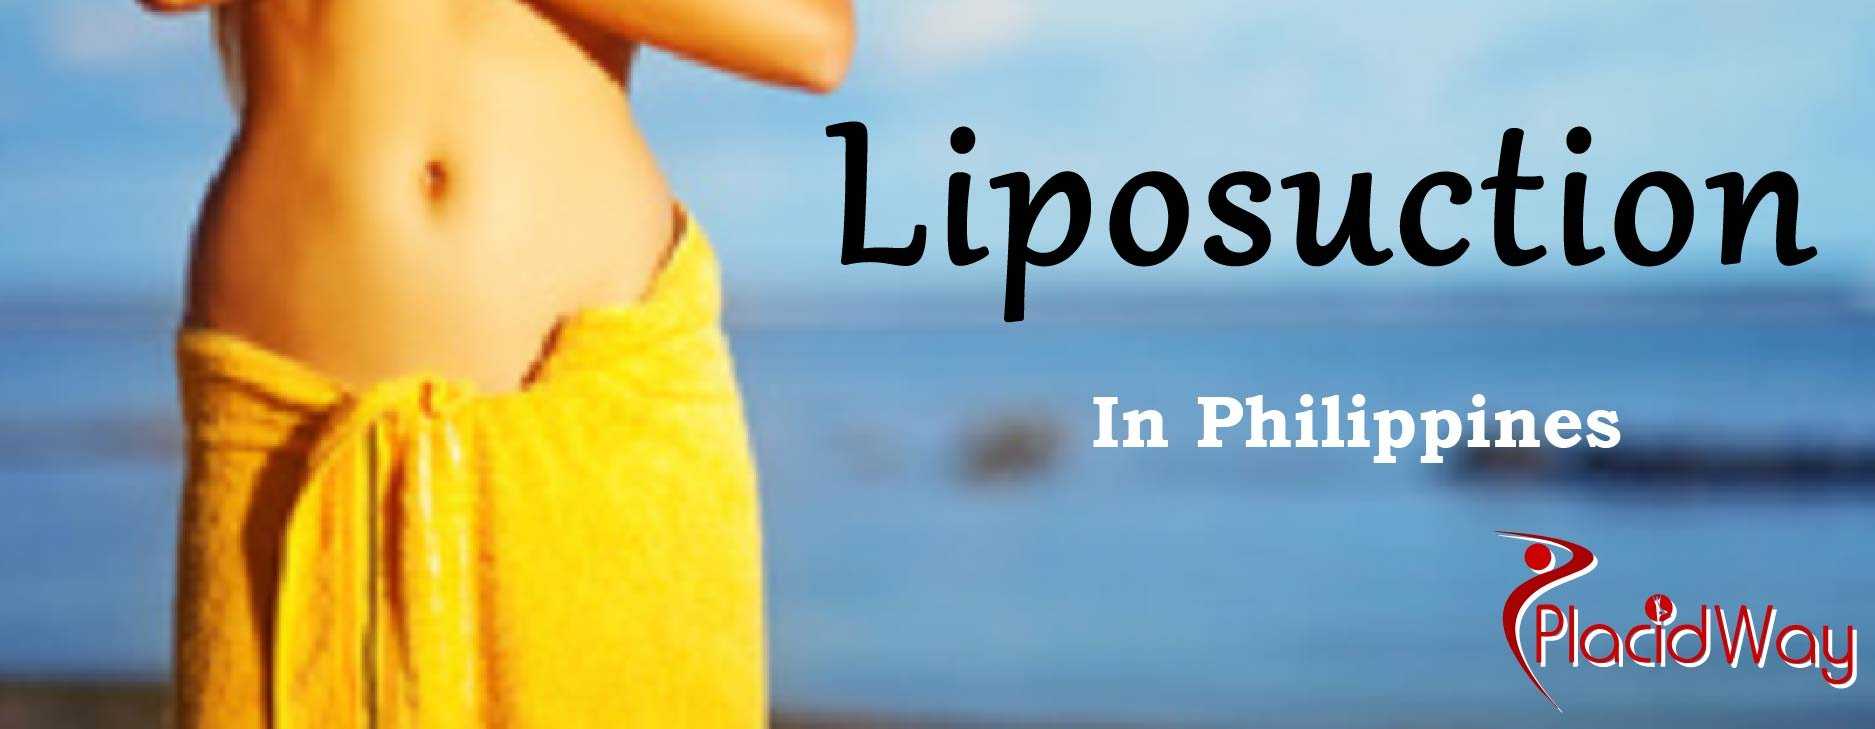 Liposuction Surgery Abroad, Affordable Cosmetic Surgery Treatment